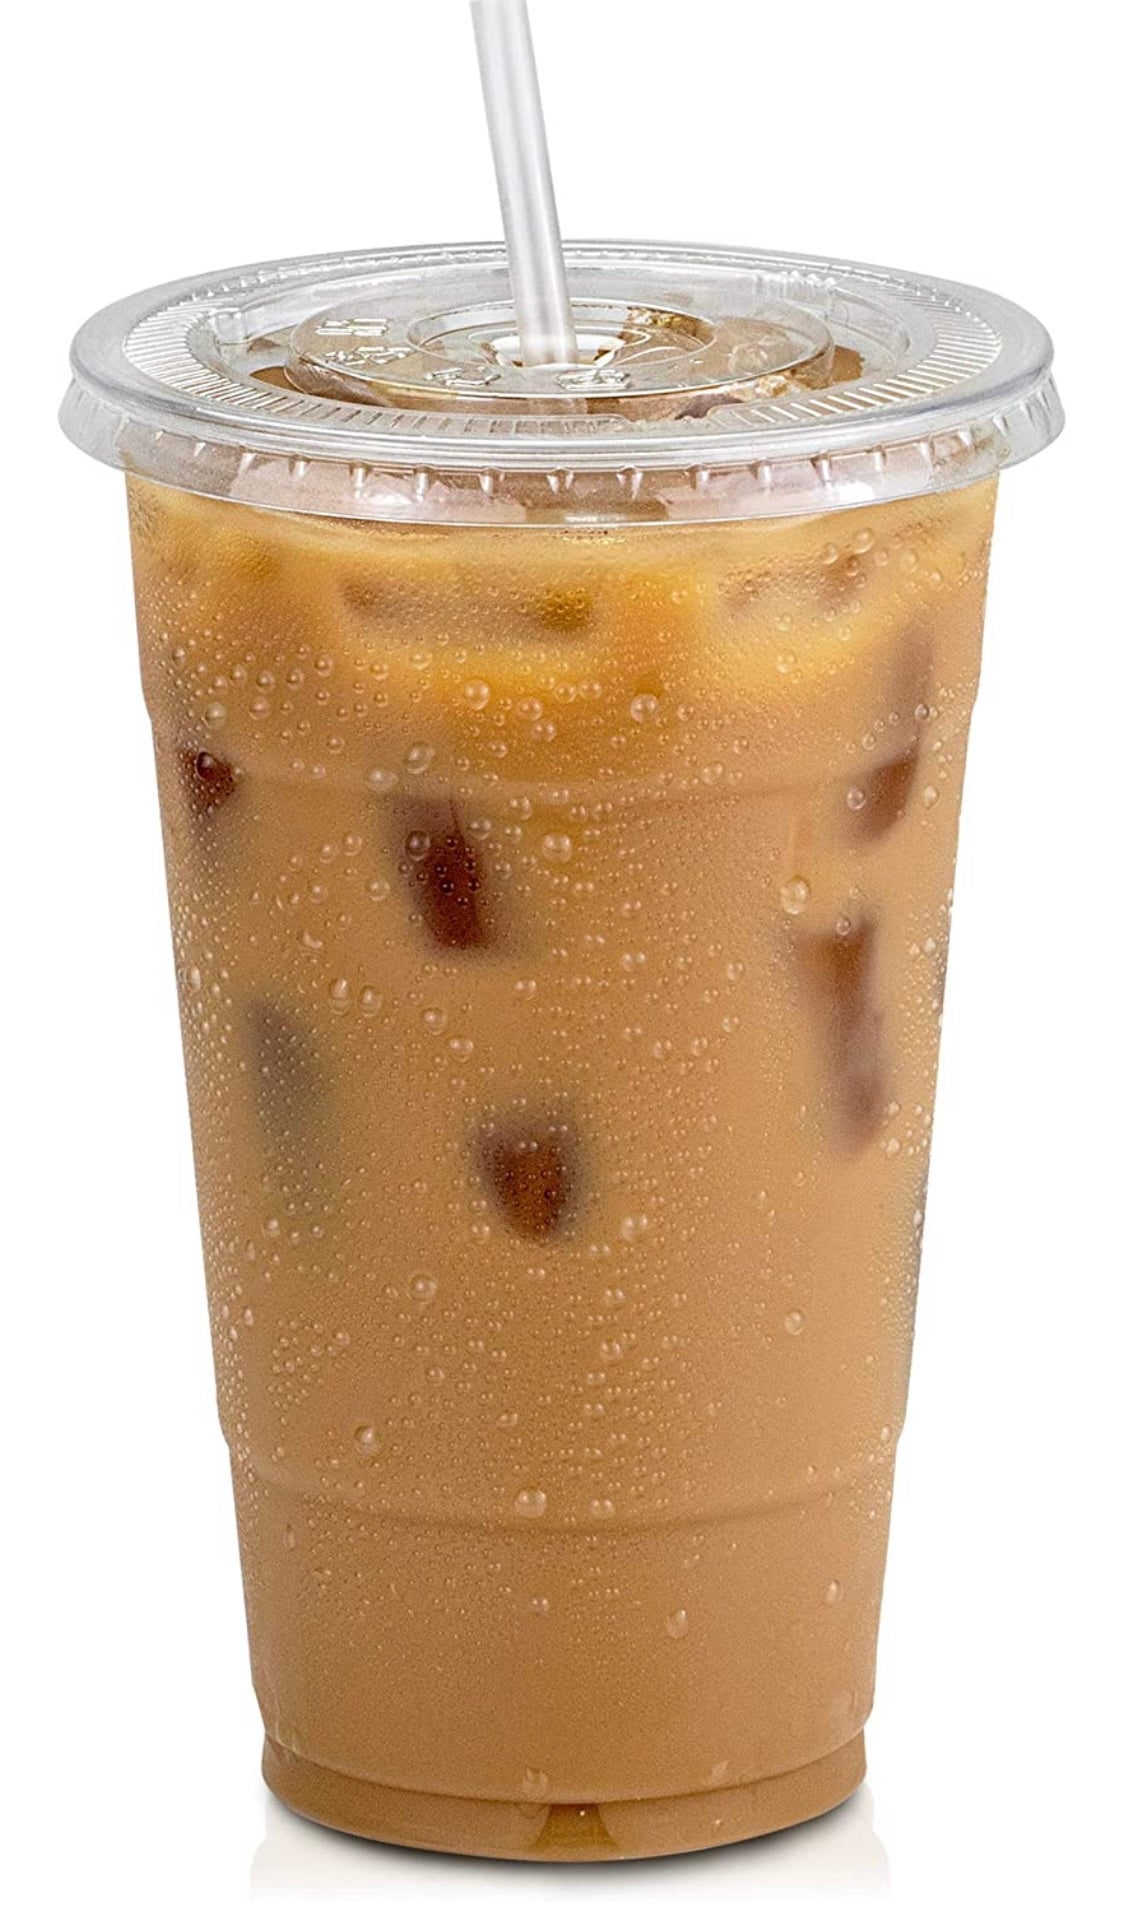 Clear iced Cups with Lids for Iced Coffee Bubble Boba Tea Smoothie